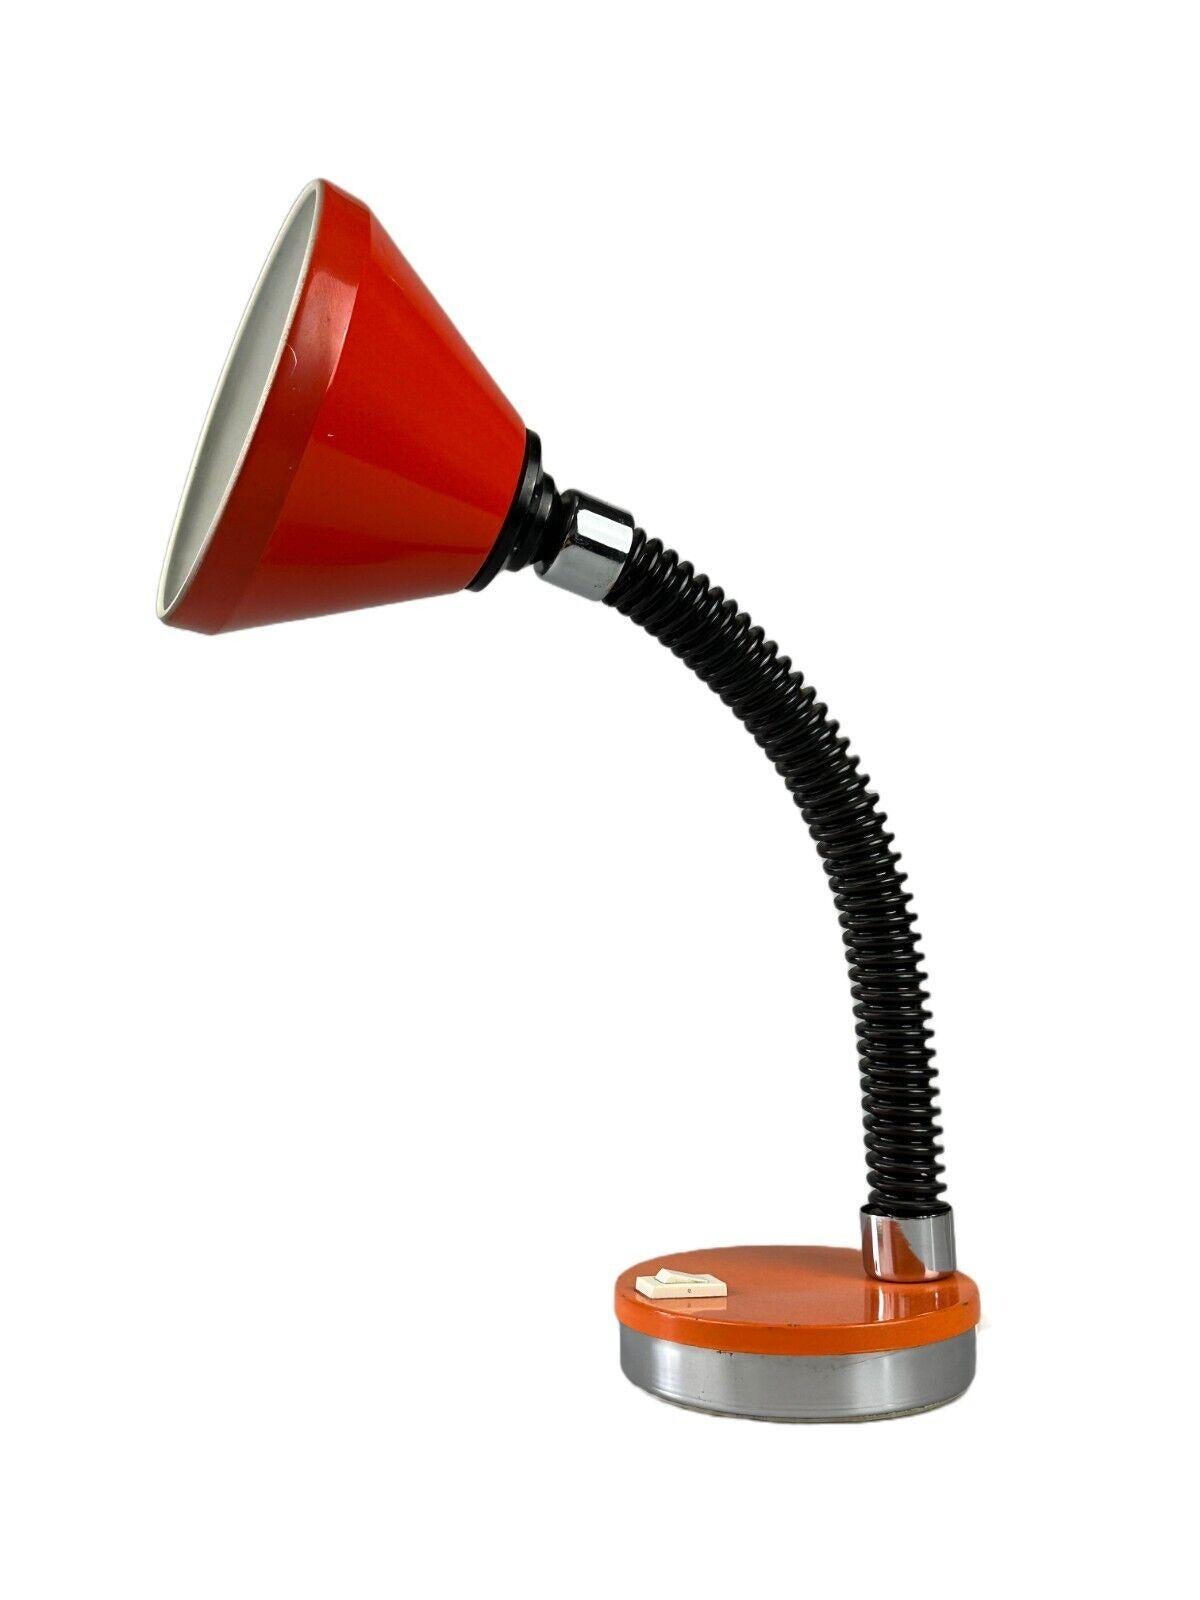 60s 70s Desk Lamp Table Lamp Germany Flexible Design Space Age

Object: table lamp

Manufacturer:

Condition: good - vintage

Age: around 1960-1970

Dimensions:

Width = 29cm
Depth = 15cm
Height = 38cm

Material: metal

Other notes:

E27 socket

The